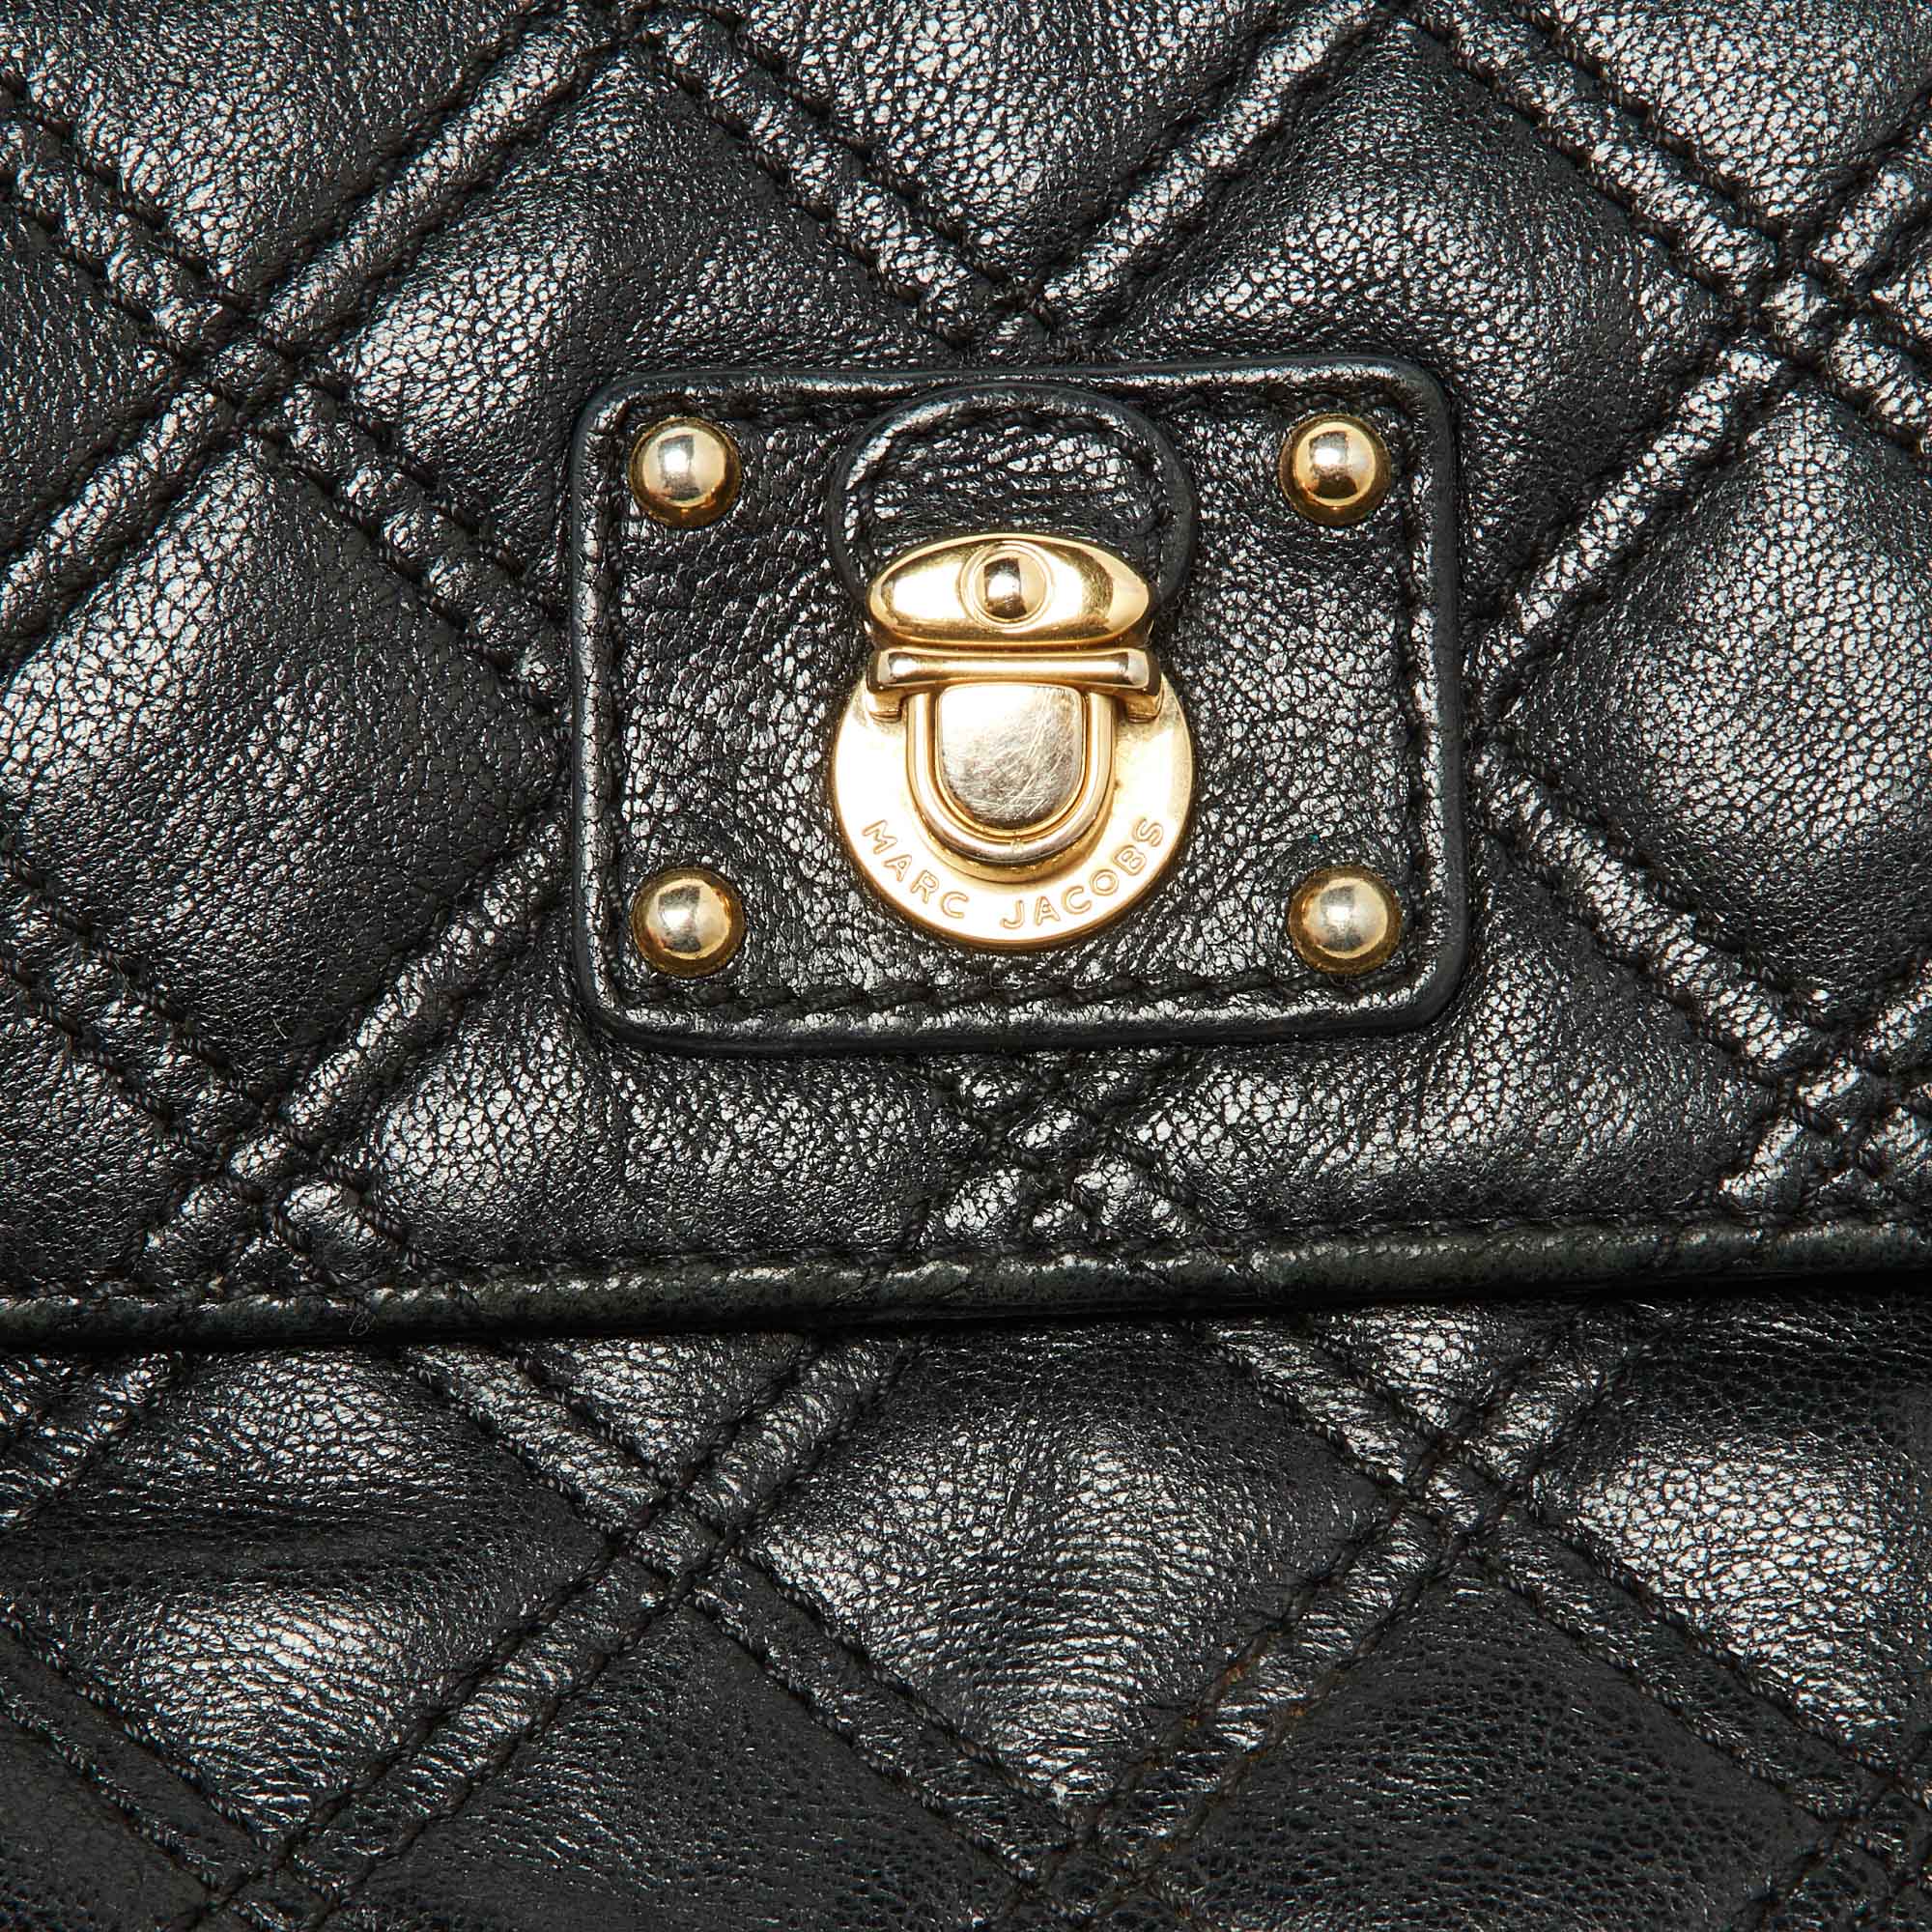 Marc By Marc Jacobs Black Quilted Leather Flap Crossbody Bag